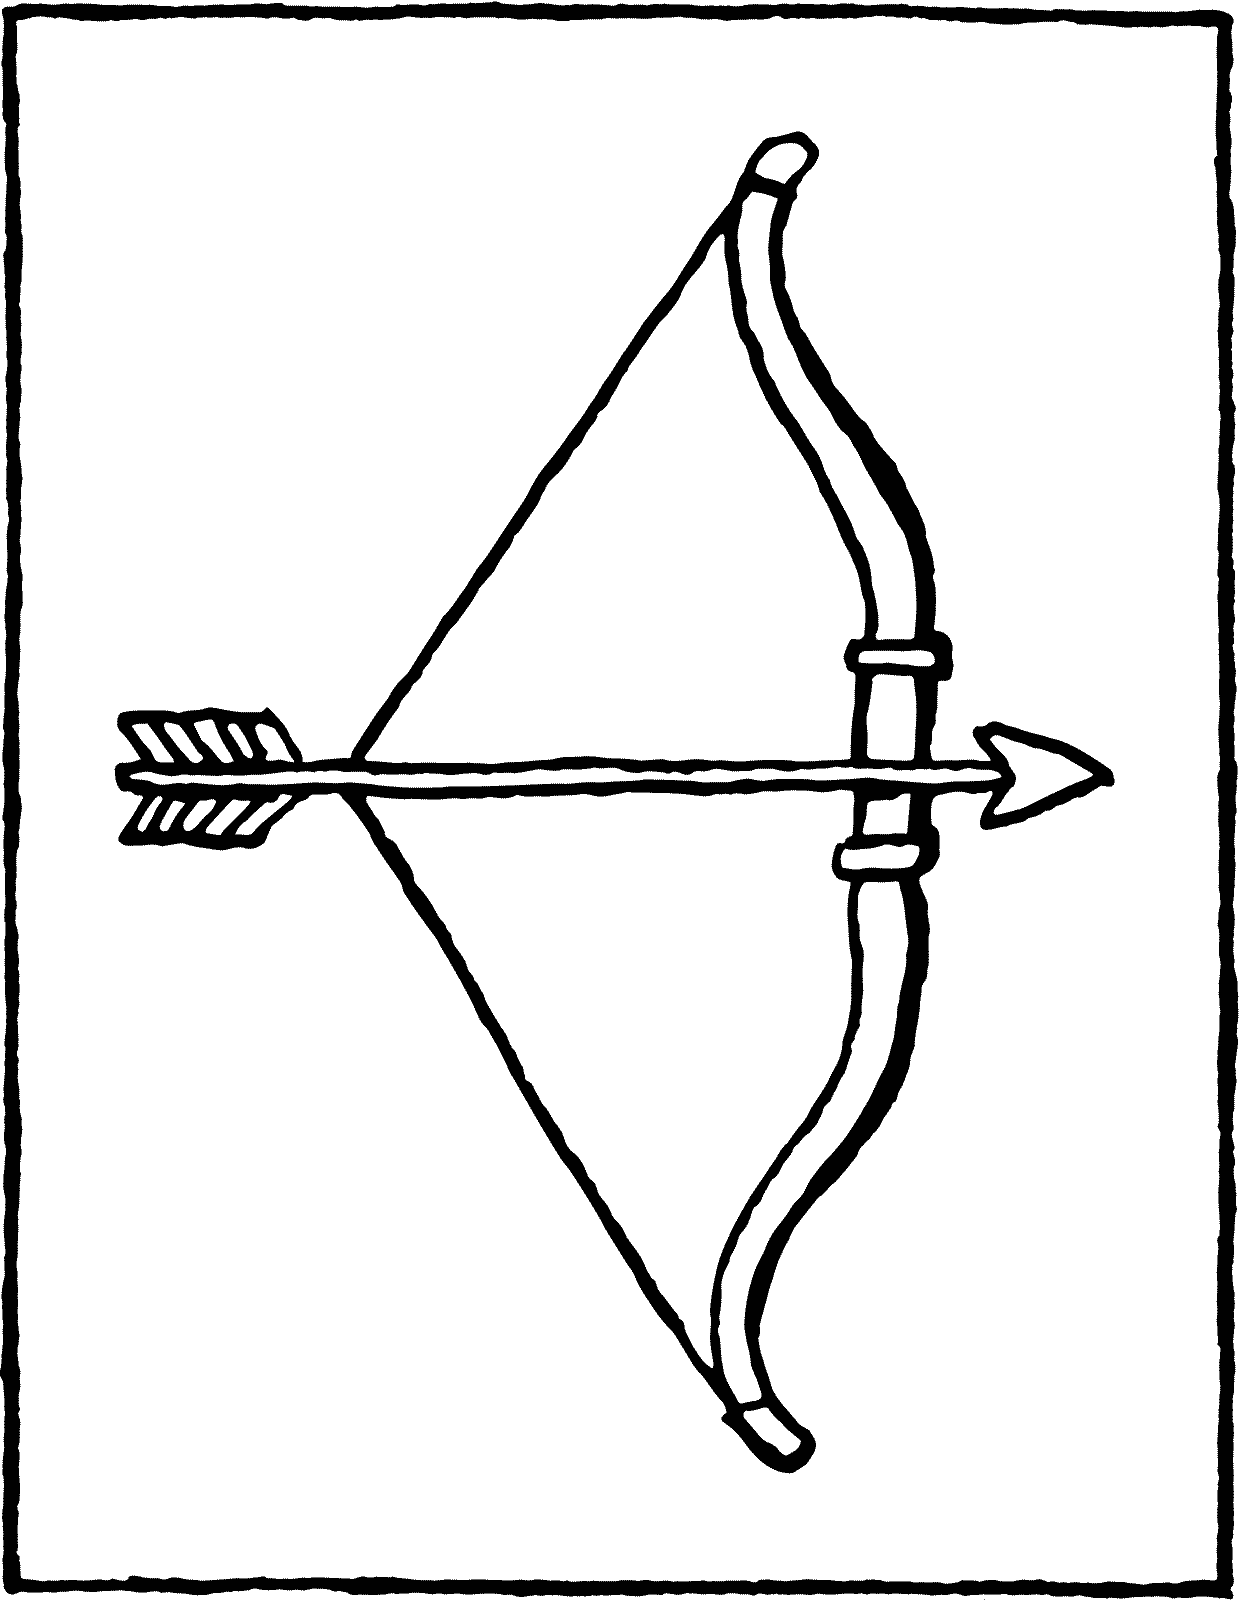 Bow And Arrow For Kids Coloring Page